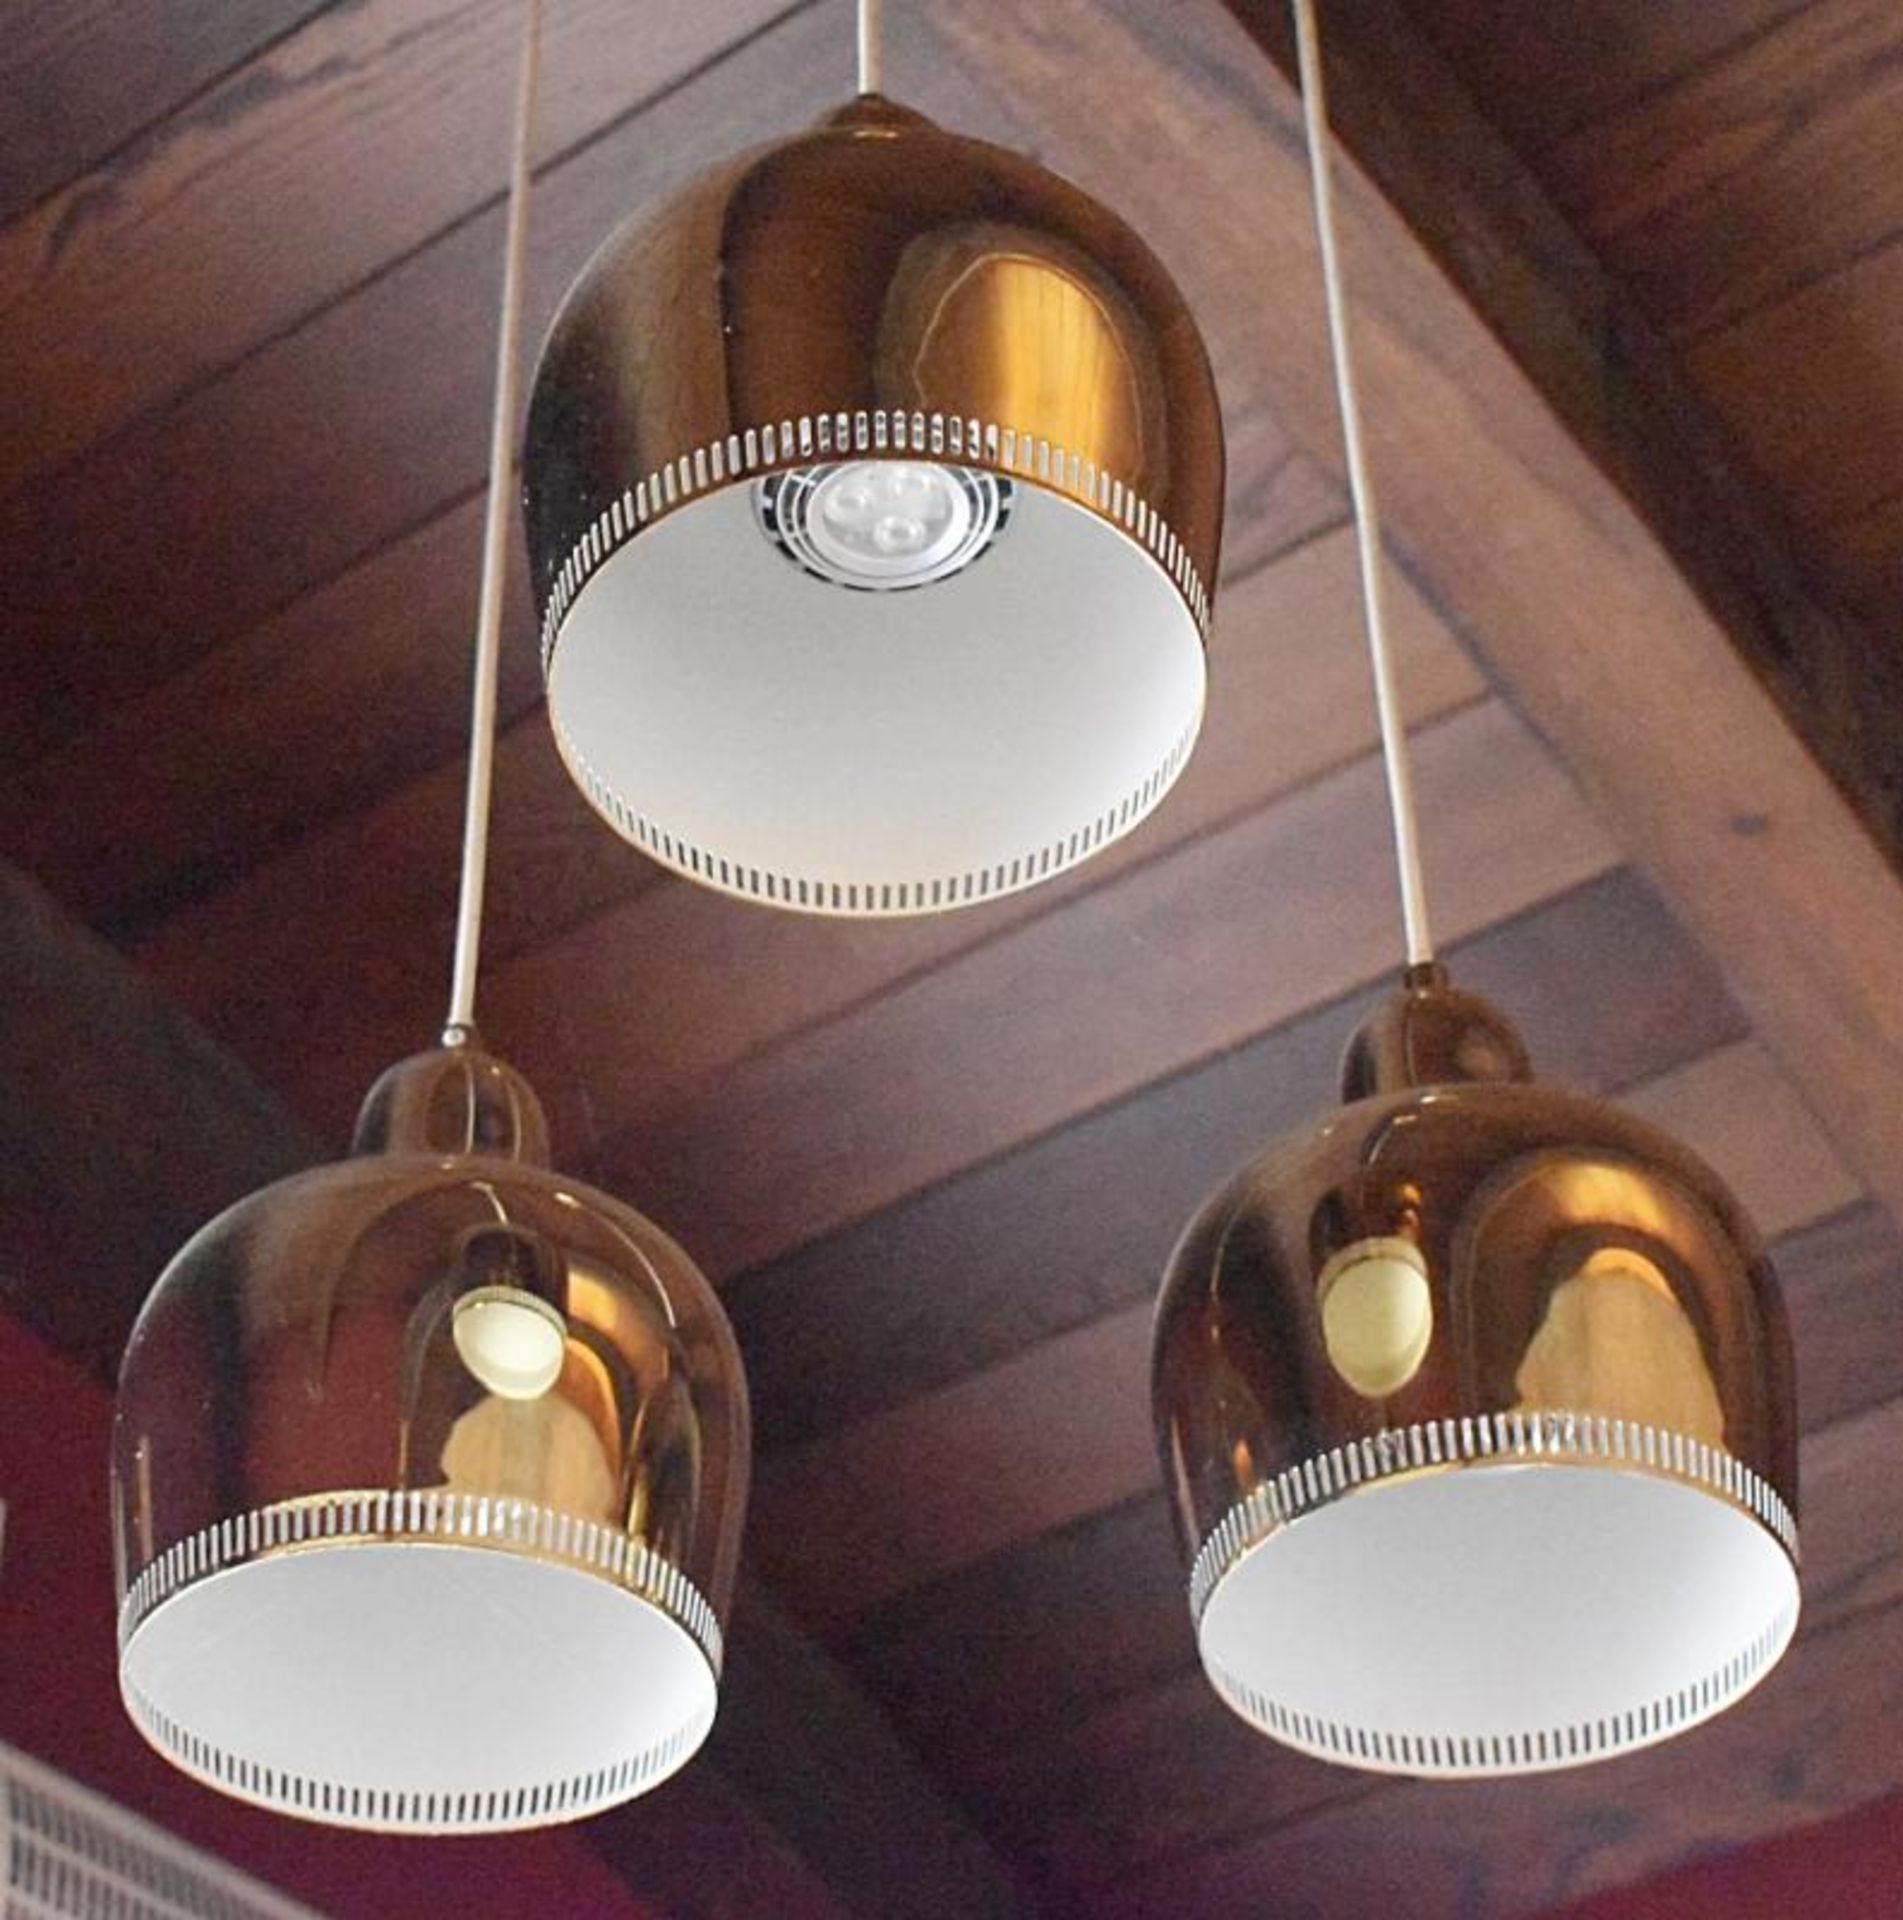 1 x Set of Three Ceiling Lights Featuring Brass Pendants and Ceiling Roses - Pendant Diameter 16